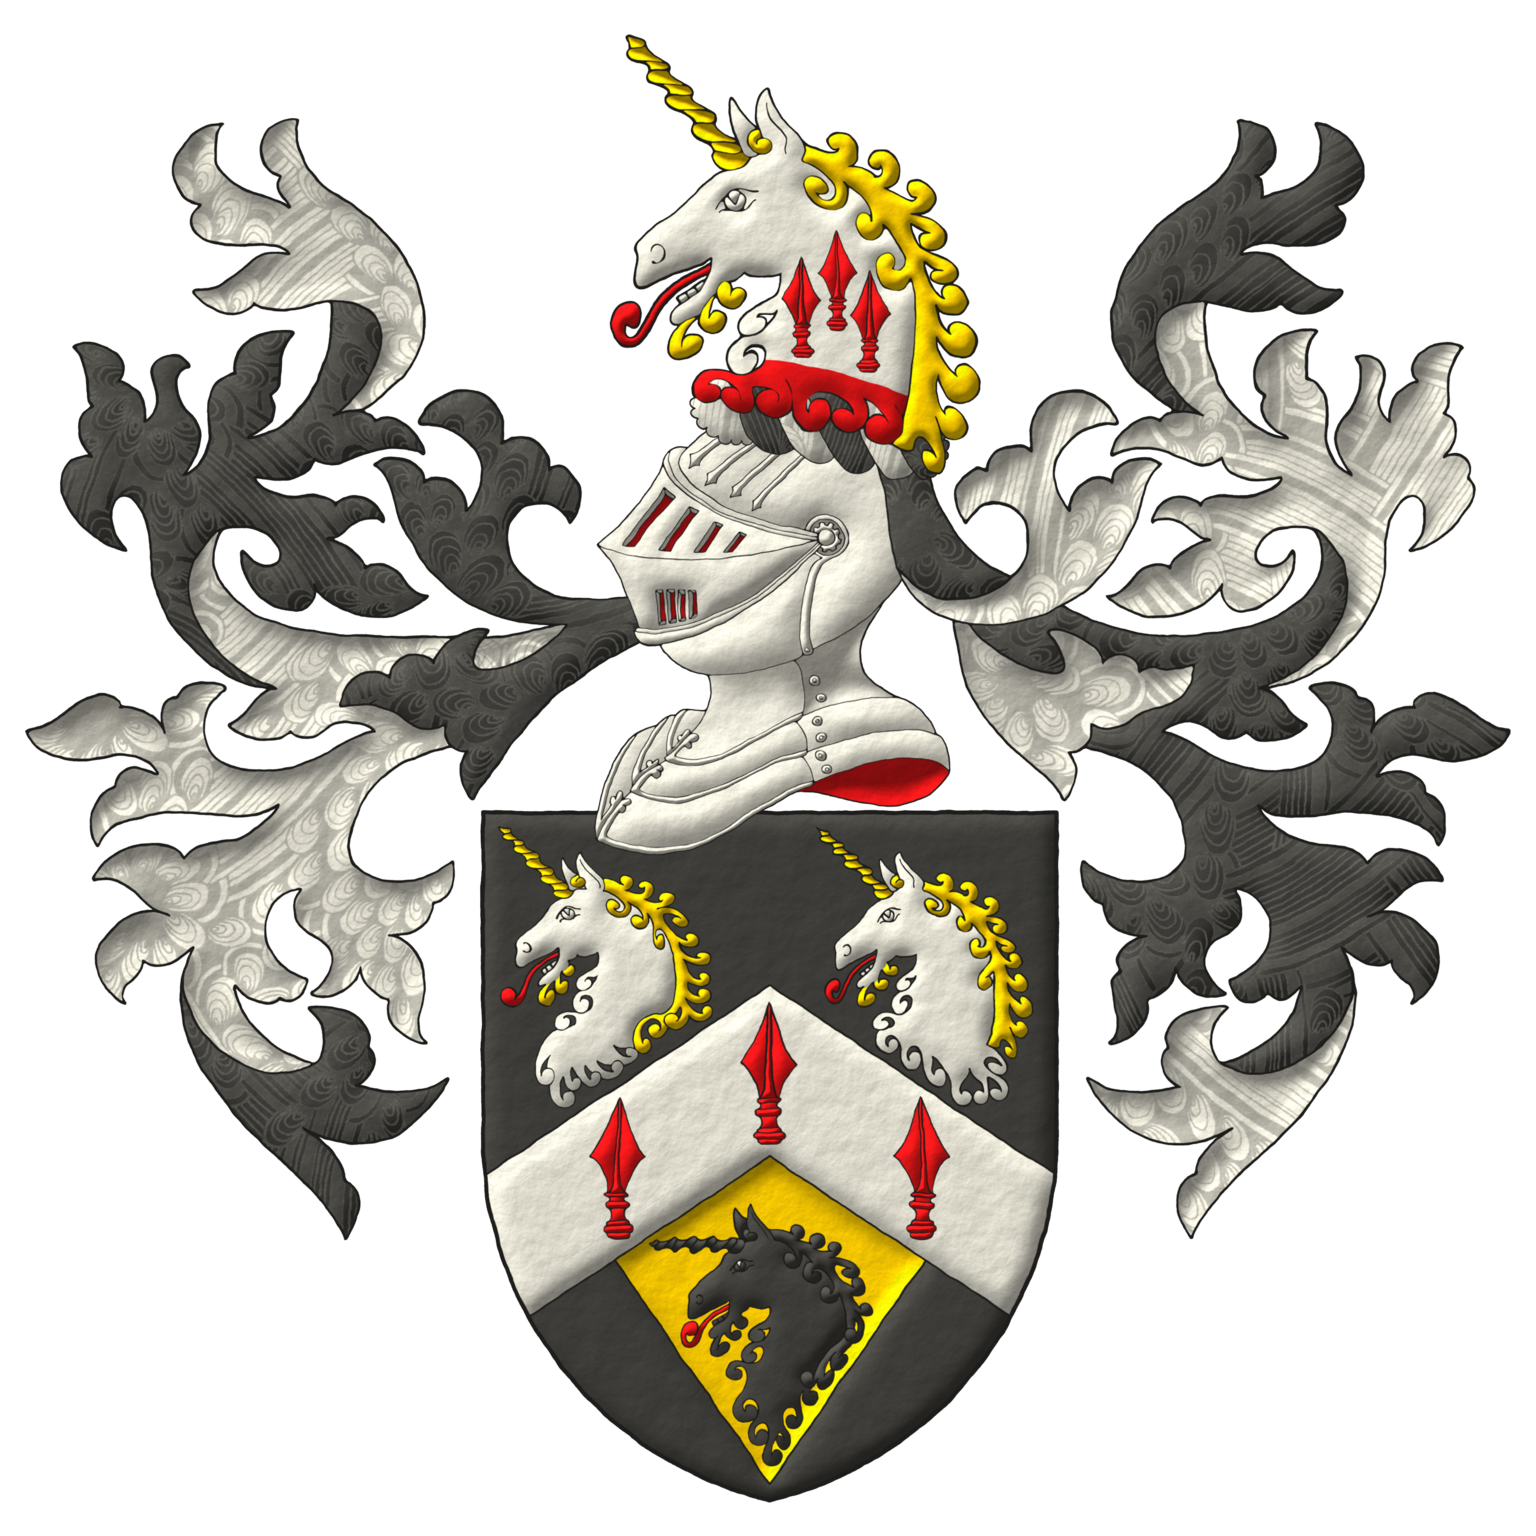 Sable, on a chevron Argent three spears' heads Gules, in chief two unicorns' heads erased Argent, horned and crined Or, langued Gules, in base on a pile of the last issuant from the chevron a unicorn head erased Sable, langued Gules. Crest: Upon a helm with a wreath Argent and Sable, a unicorn's head Argent, erased Gules, horned and crined Or, langued Gules, charged upon the neck with three spears' heads cheveronwise Gules. Mantling: Sable doubled Argent.